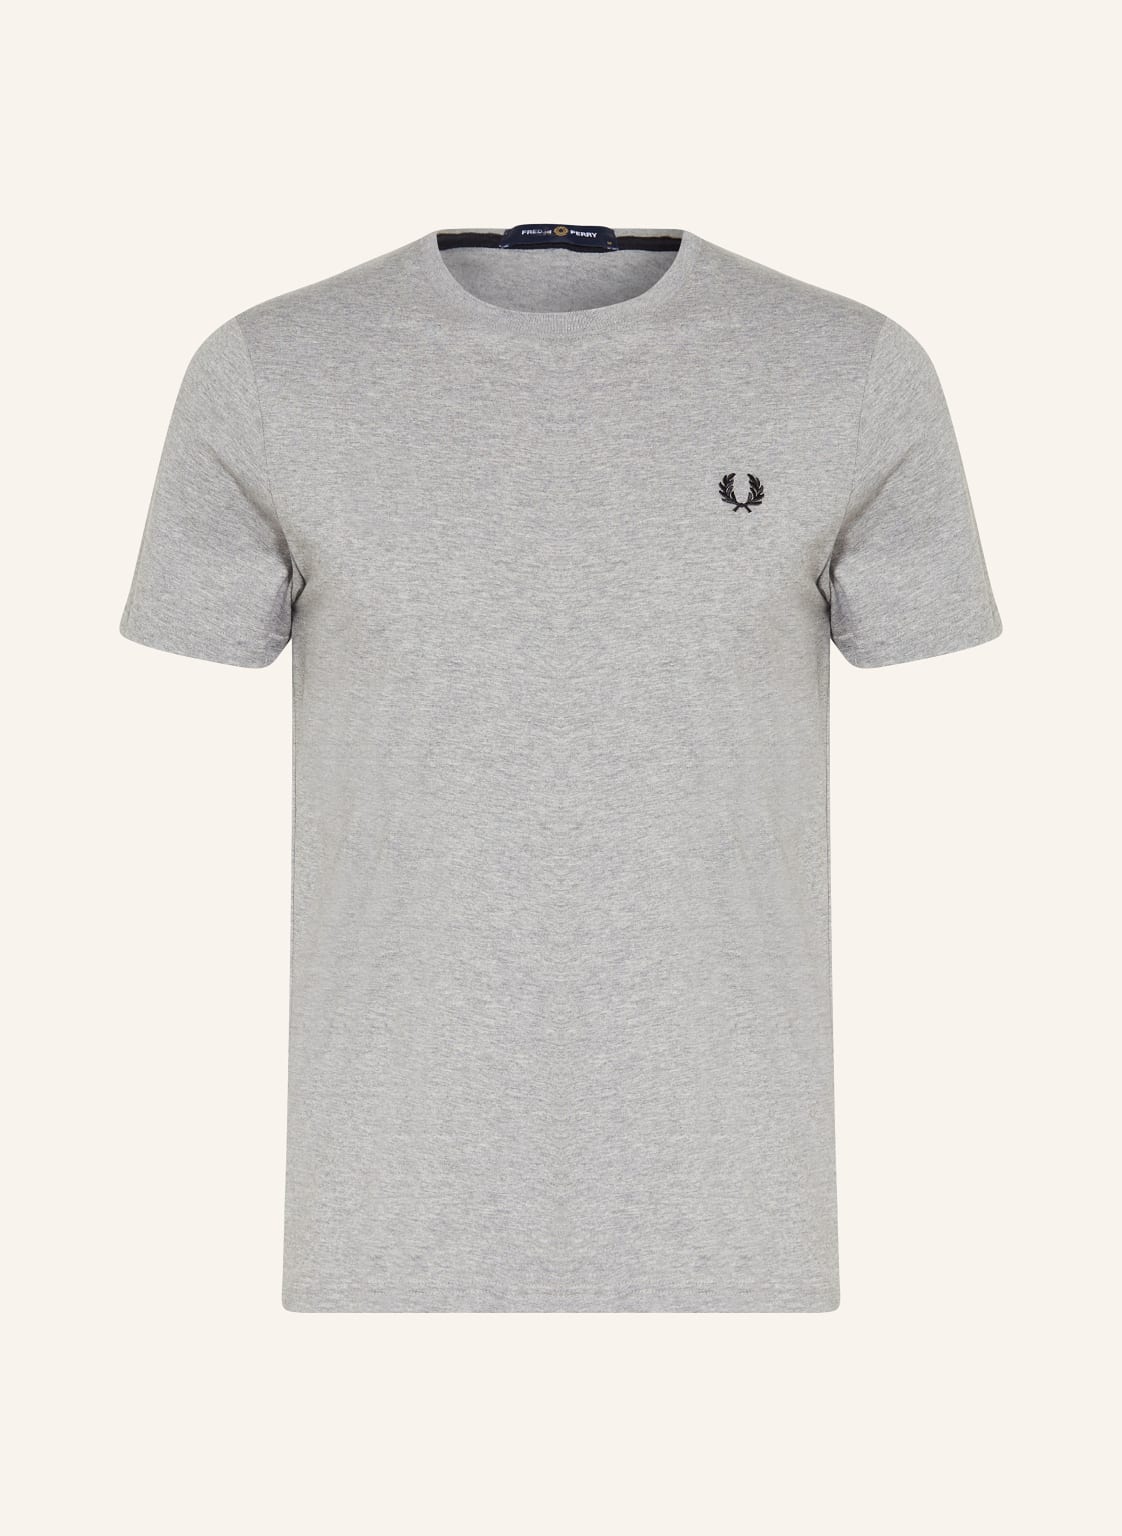 Fred Perry T-Shirt grau von Fred Perry